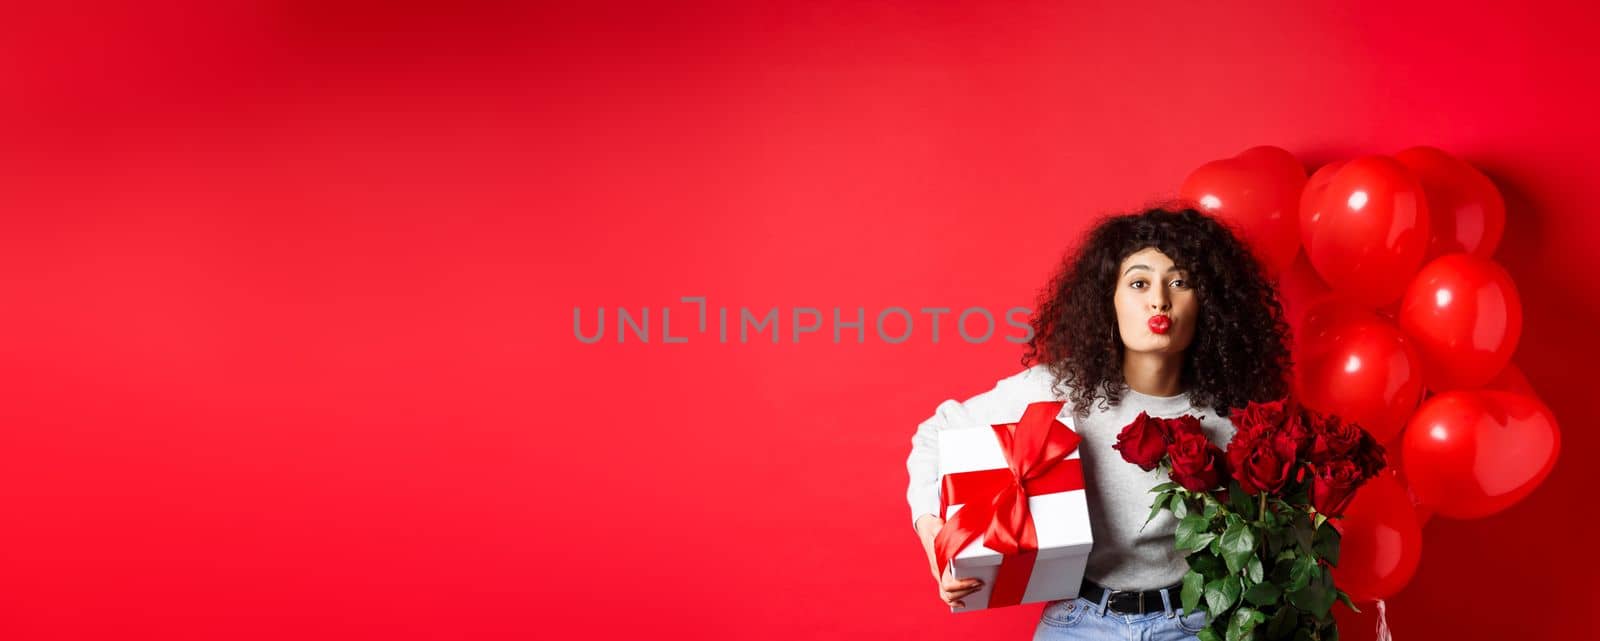 Holidays and celebration. Pretty woman celebrating birthday blowing air kiss, receive gifts and flowers on anniversary, standing near party balloons, red background.